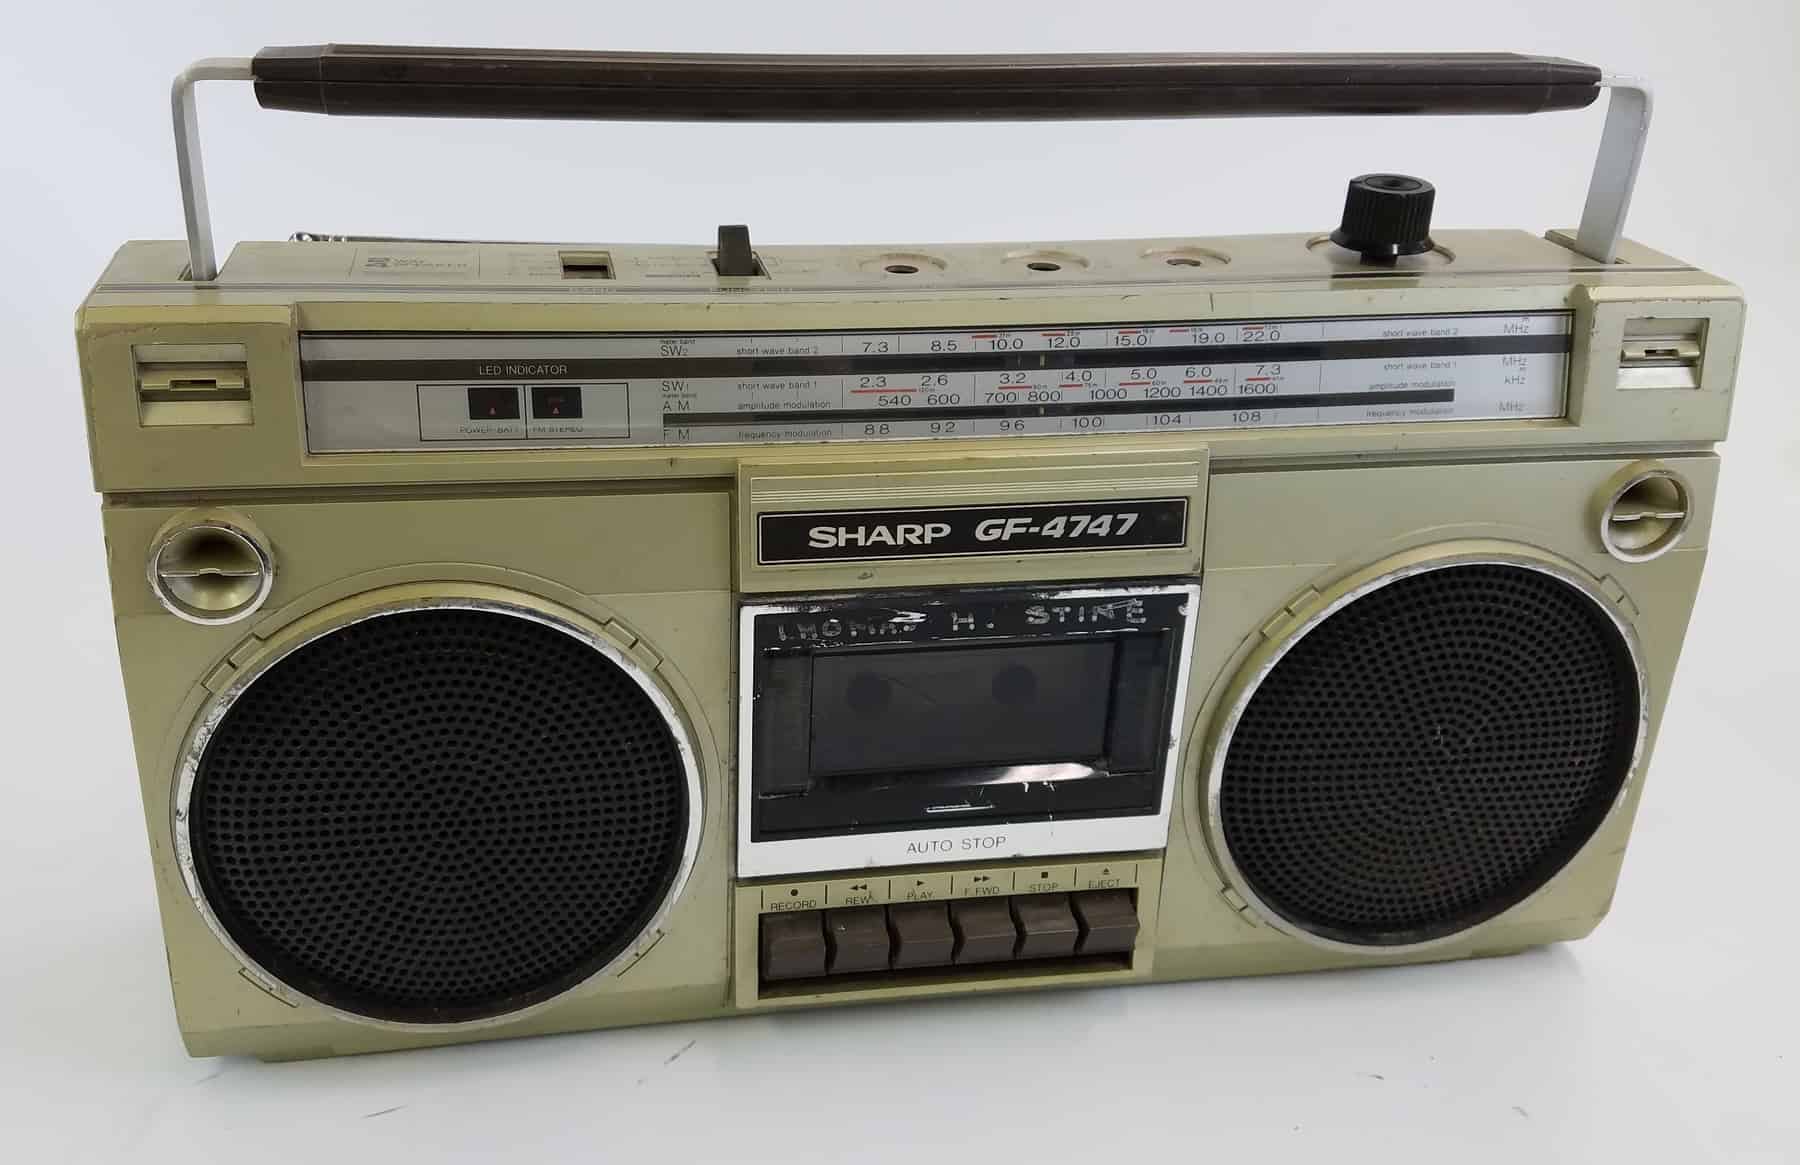 SHARP GF-4343 Stereo Radio Cassette Recorder 1980's Boombox Vintage Tested